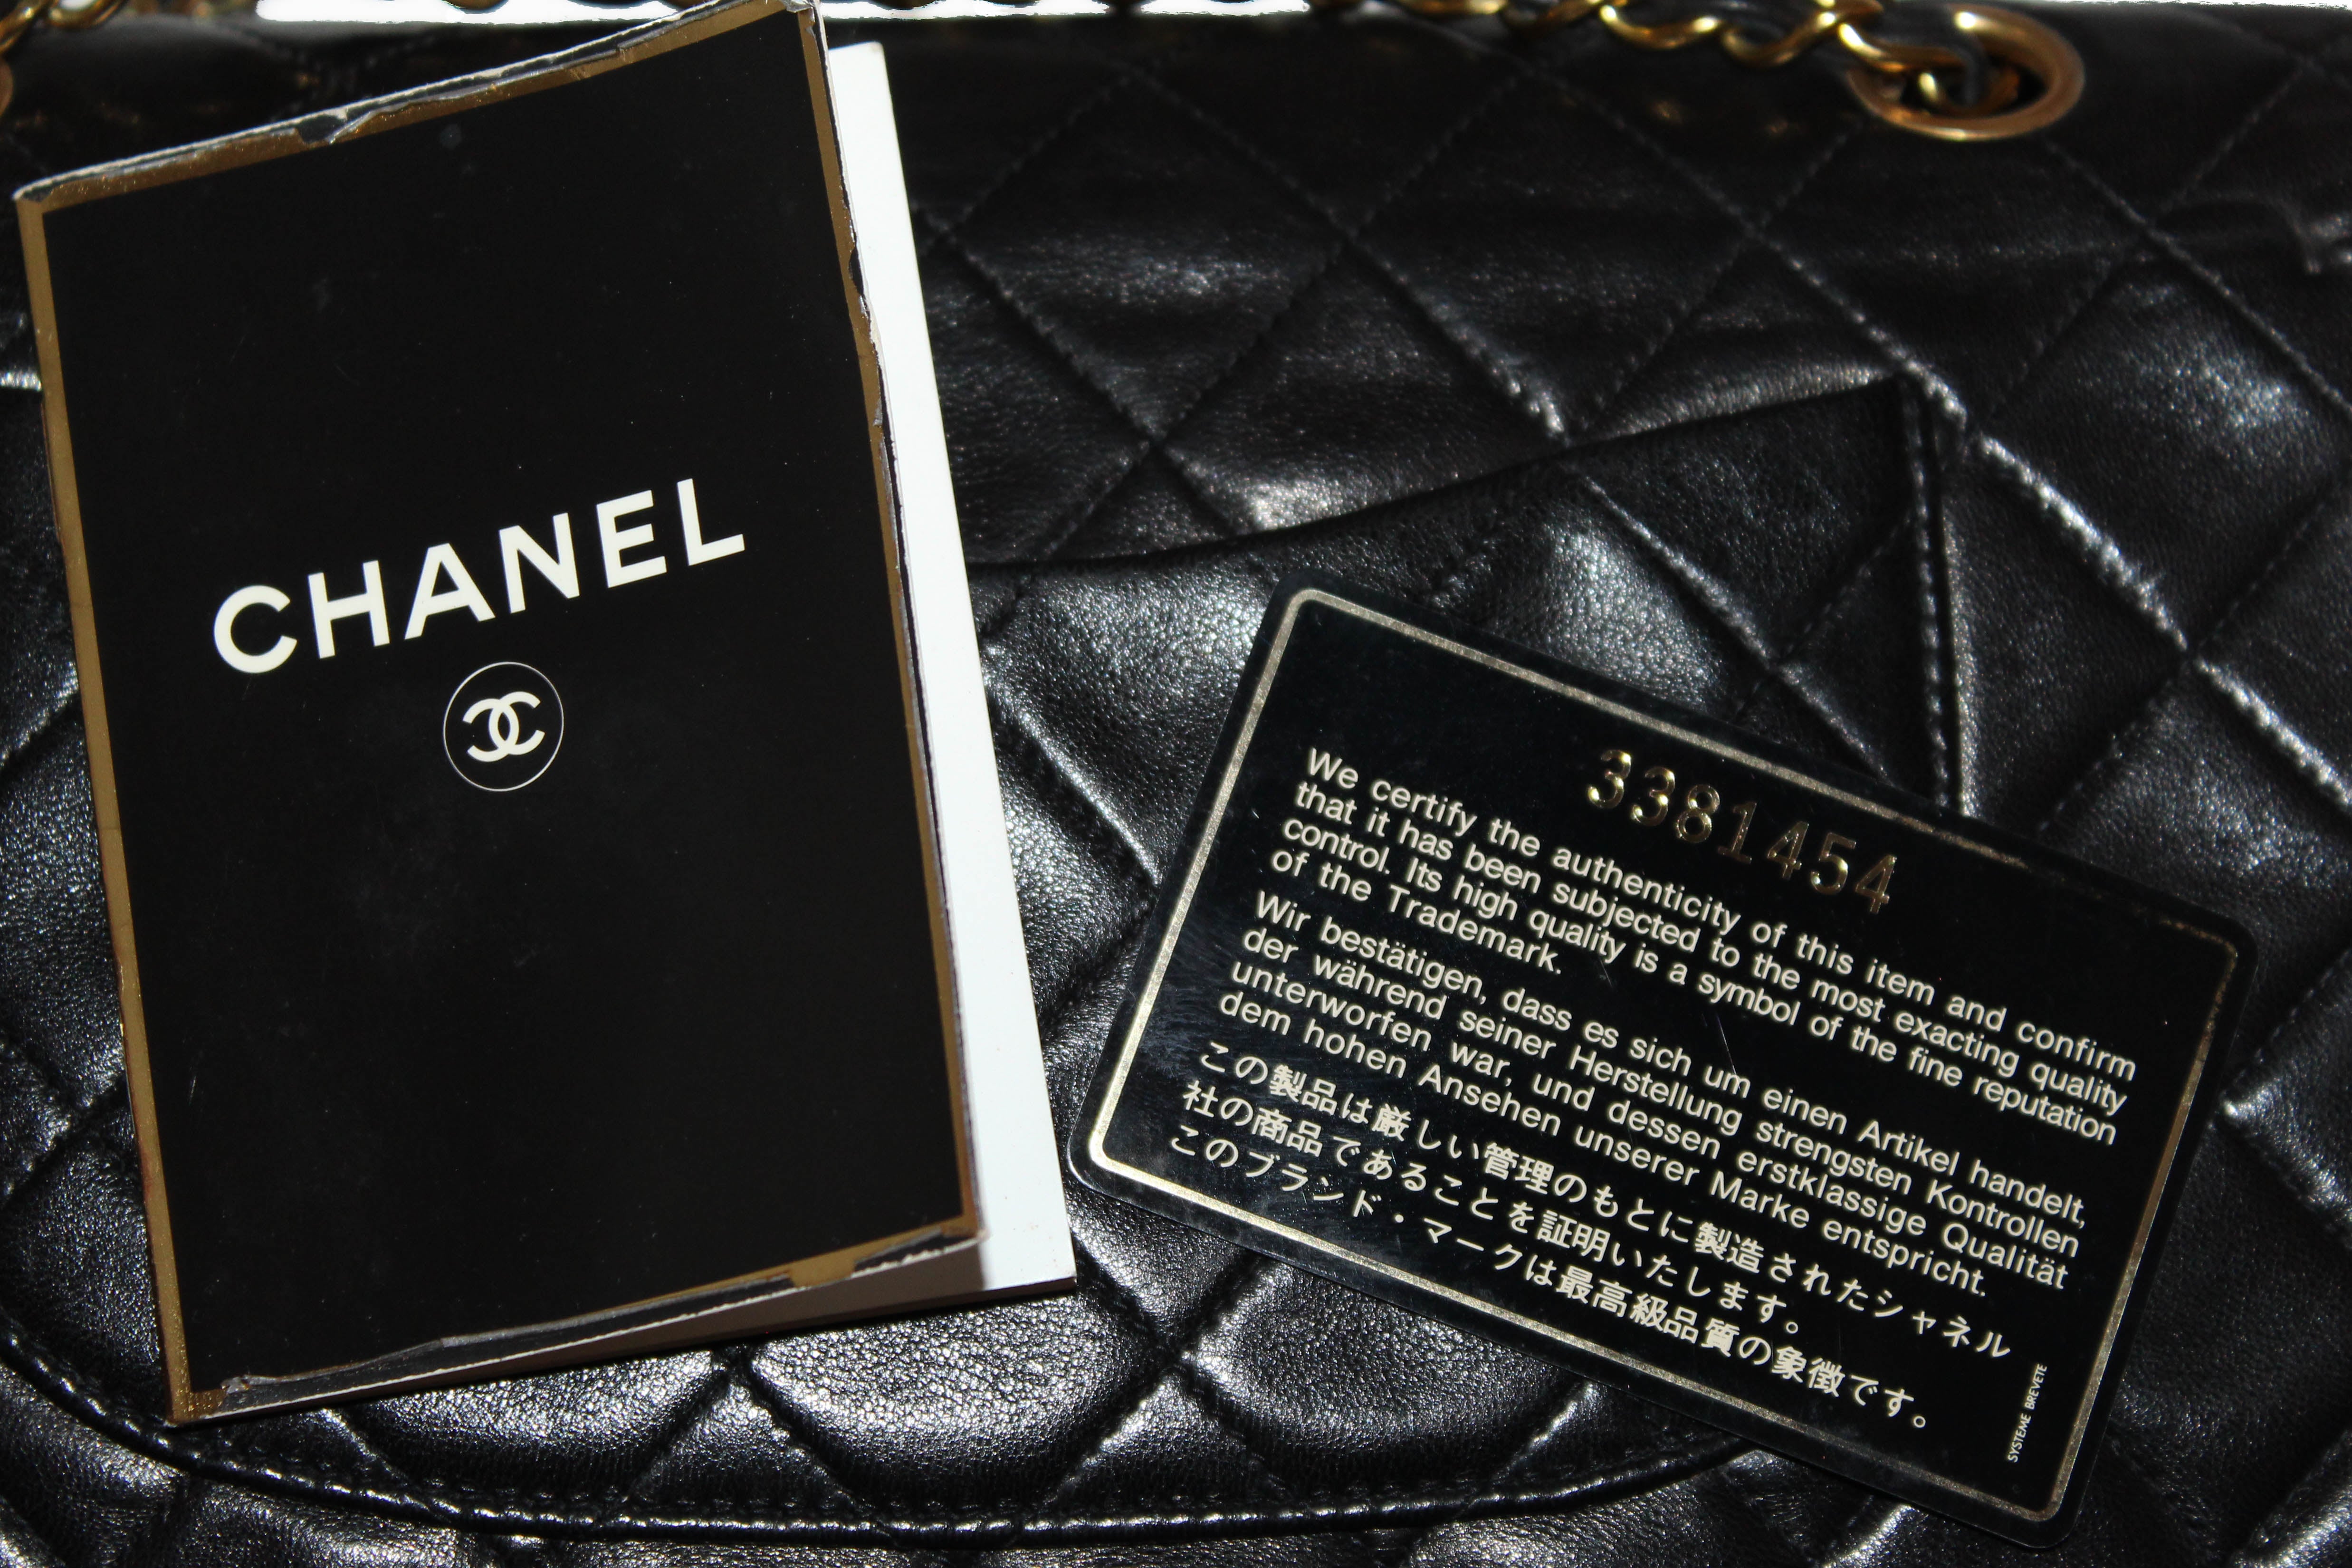 Authentic Vintage Chanel Black Medium Quilted Lambskin Leather Double Flap Bag